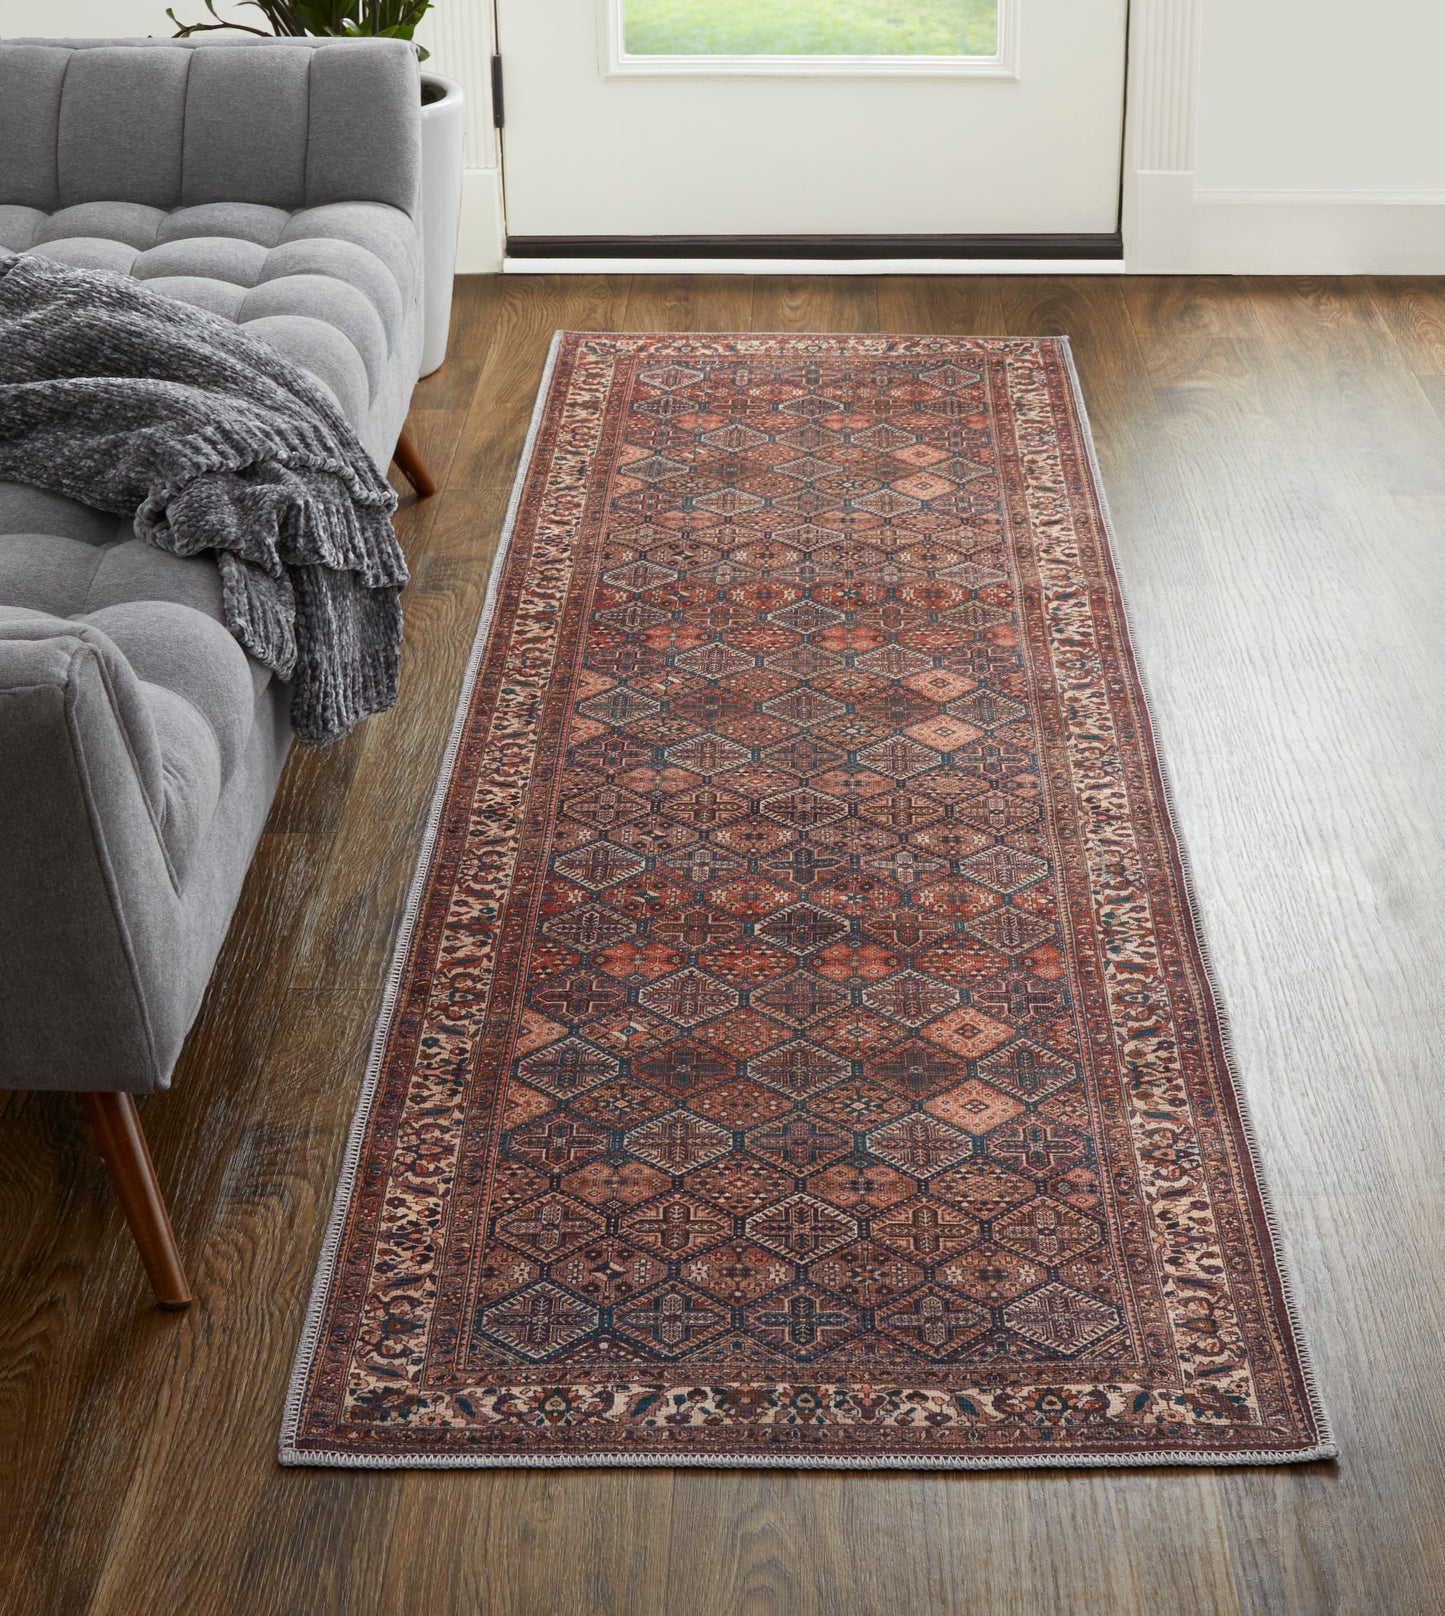 Rawlins 39HKF Power Loomed Synthetic Blend Indoor Area Rug by Feizy Rugs